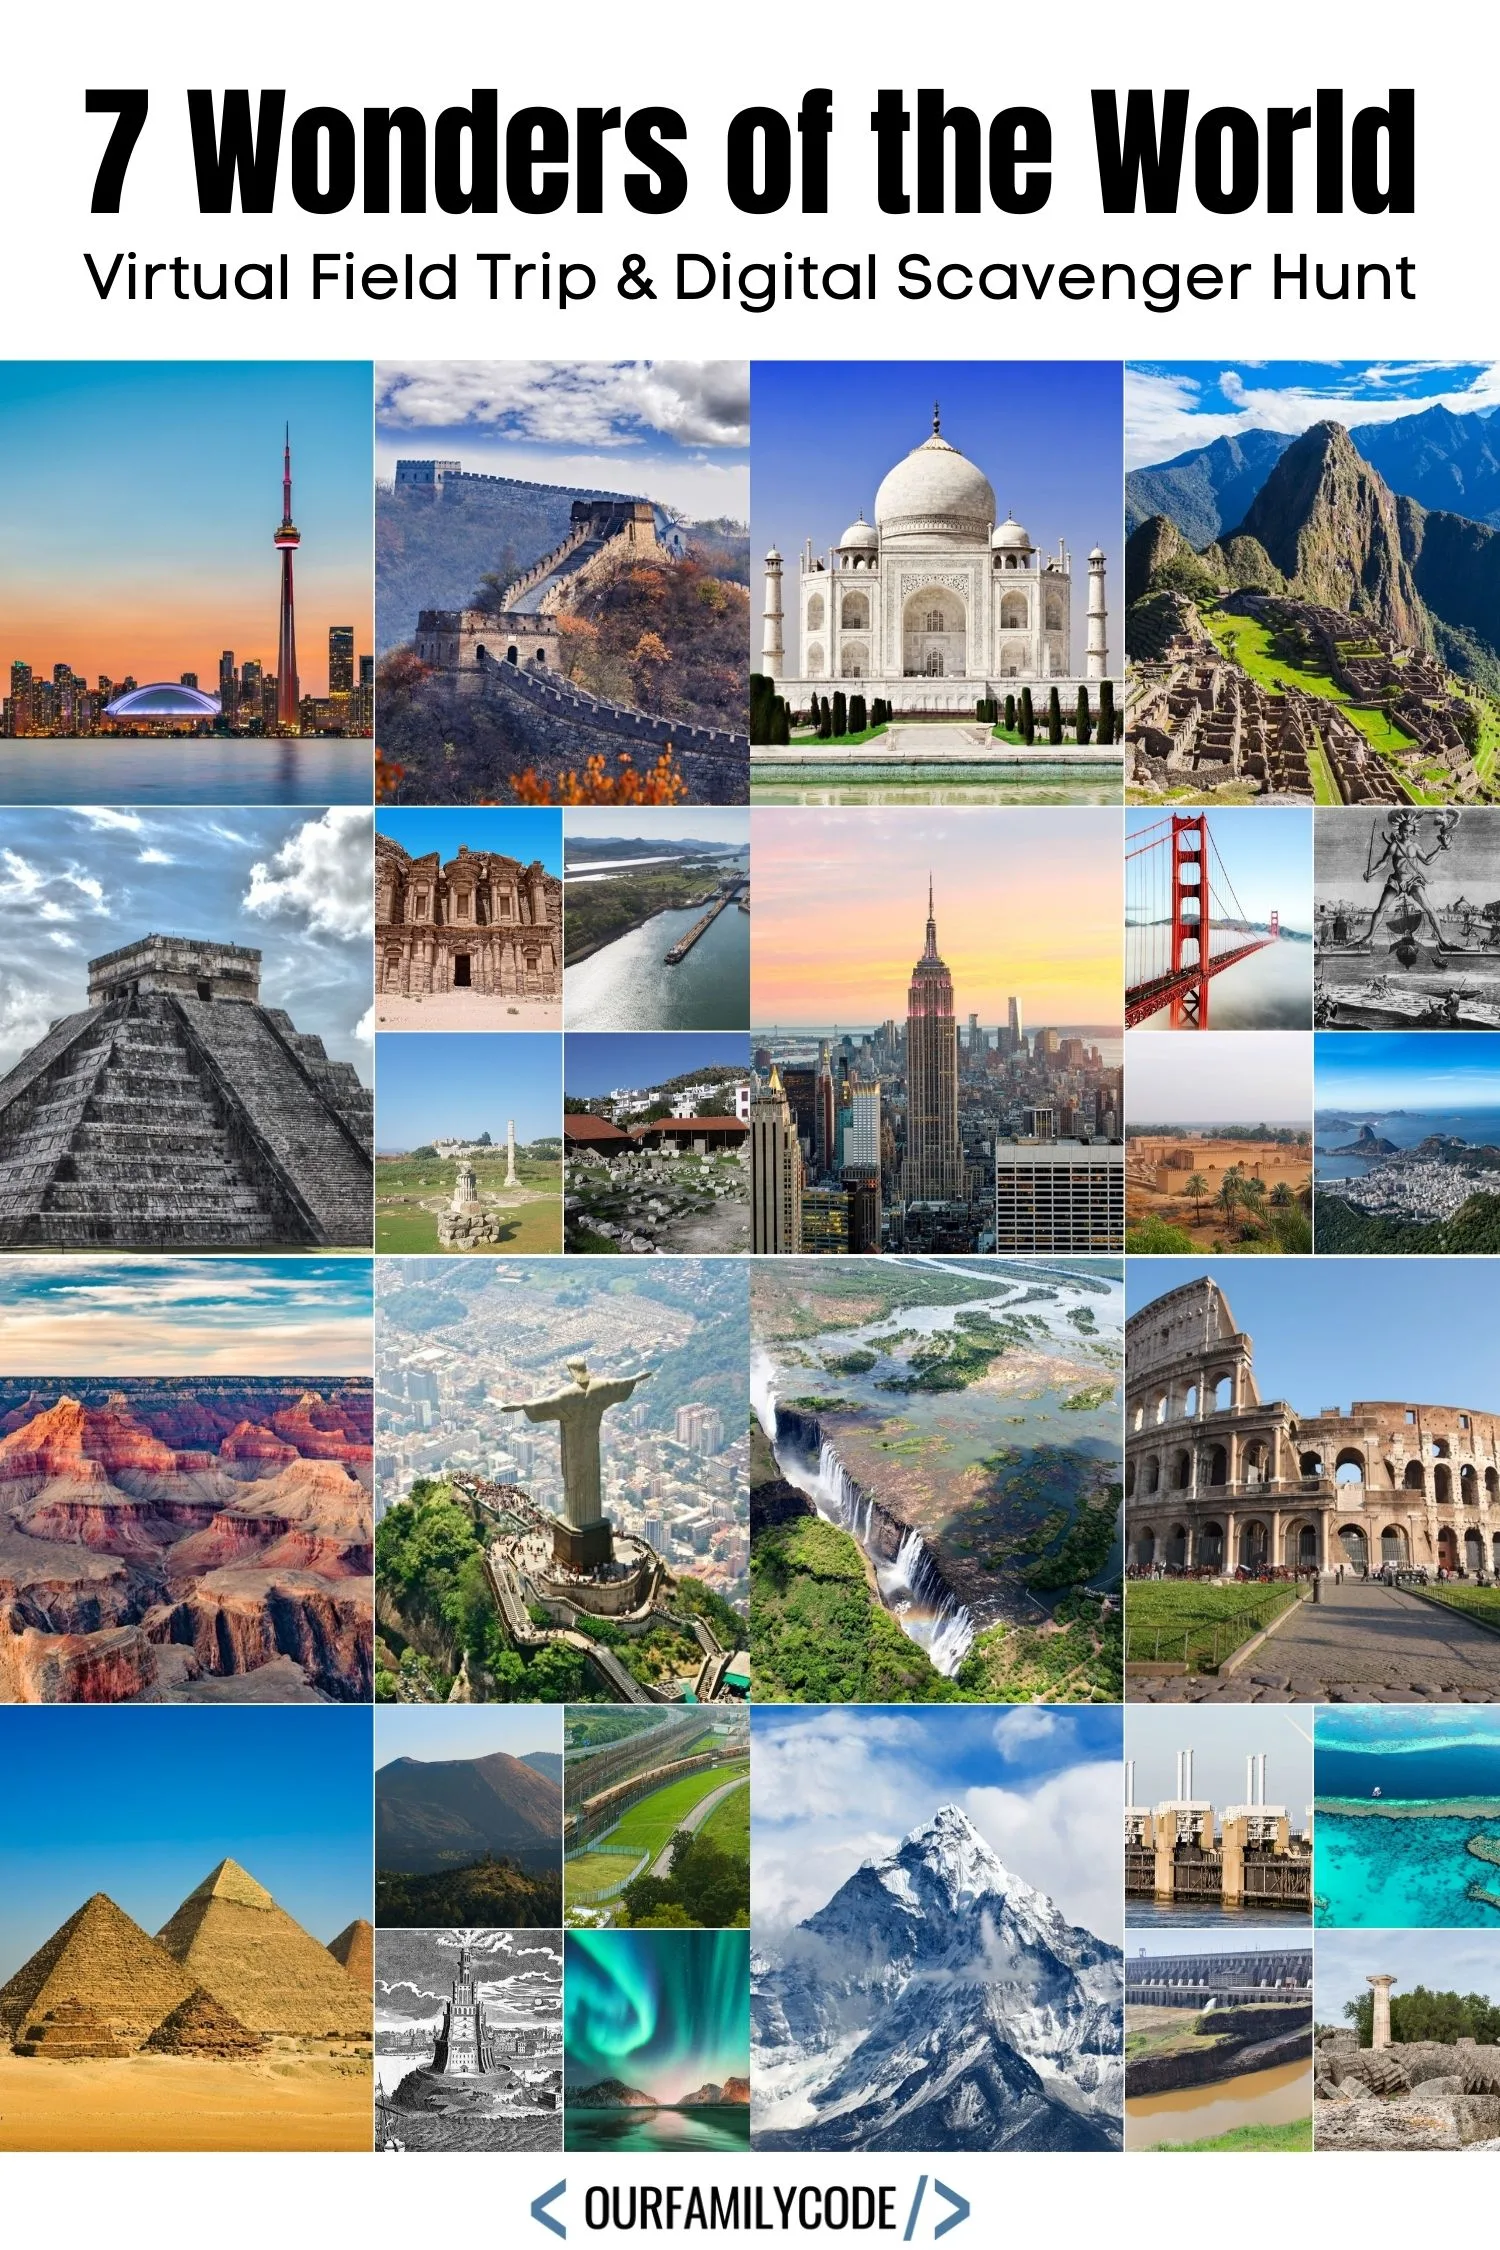 A picture with images of the seven wonders of the world.